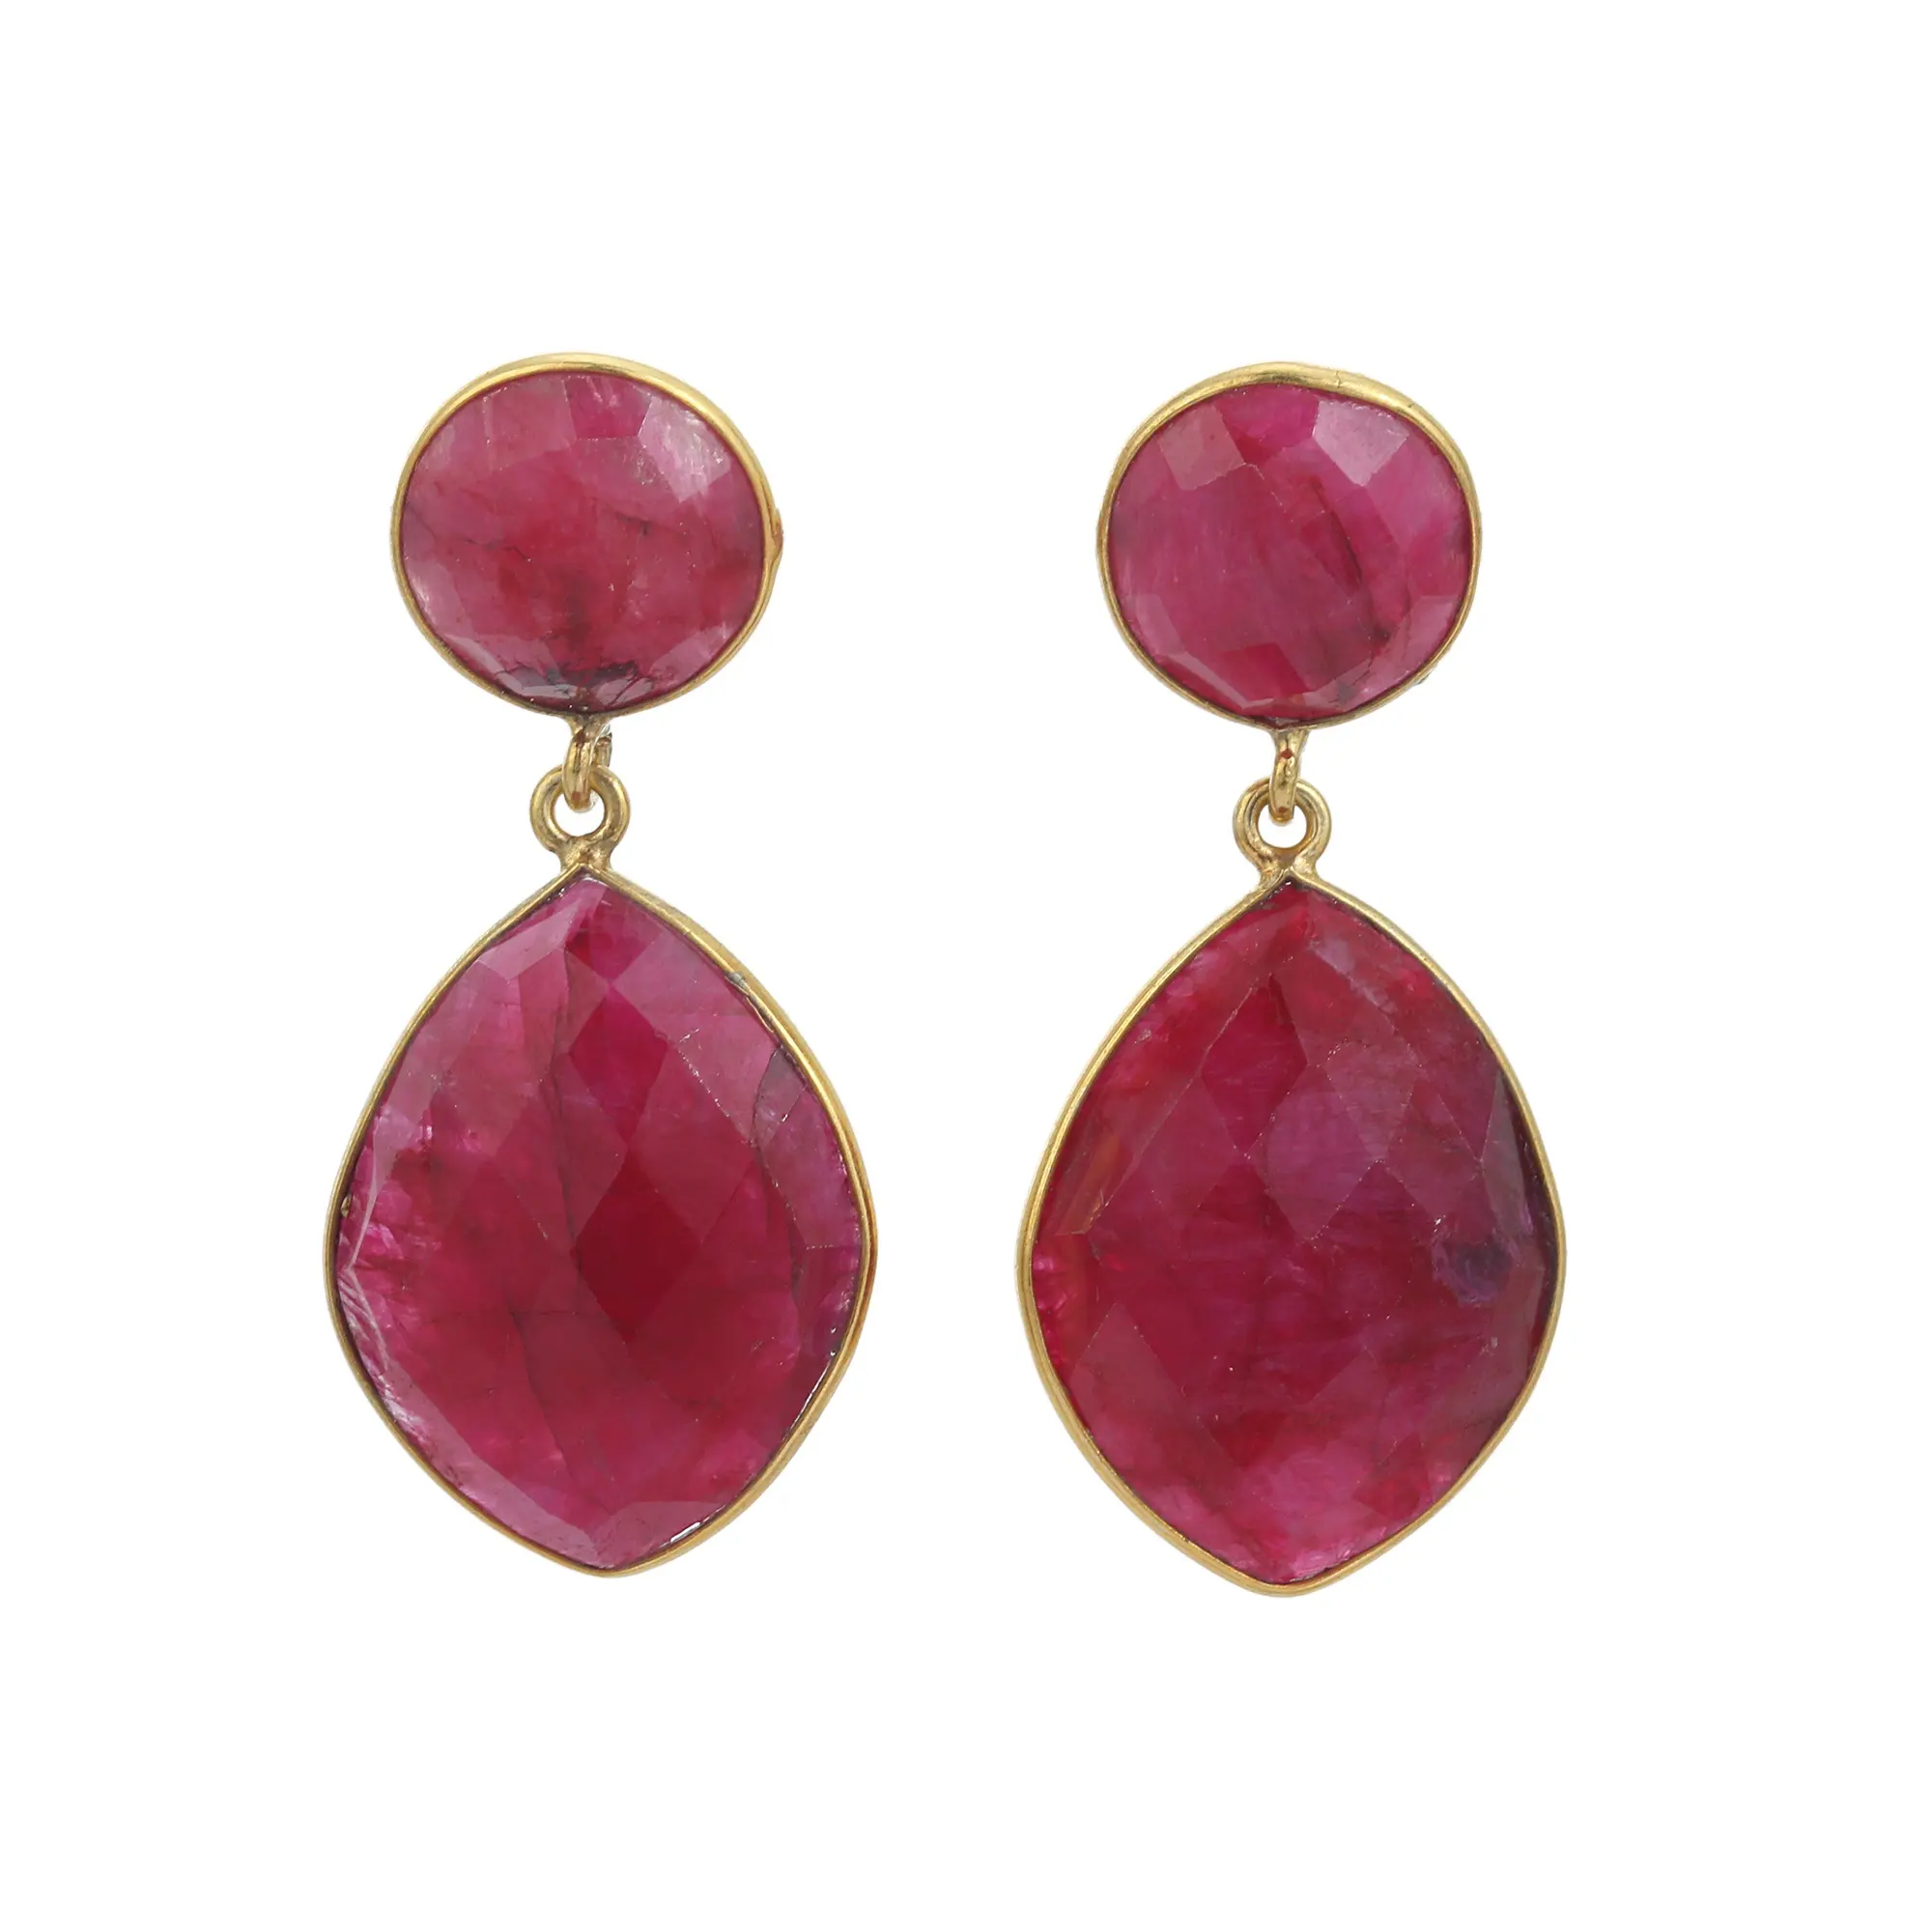 Beautiful Red Color Dyed Ruby Fancy Drop Earring 925 Sterling Silver Gold Plated Stylish Jewelry Earrings for Girls and Women